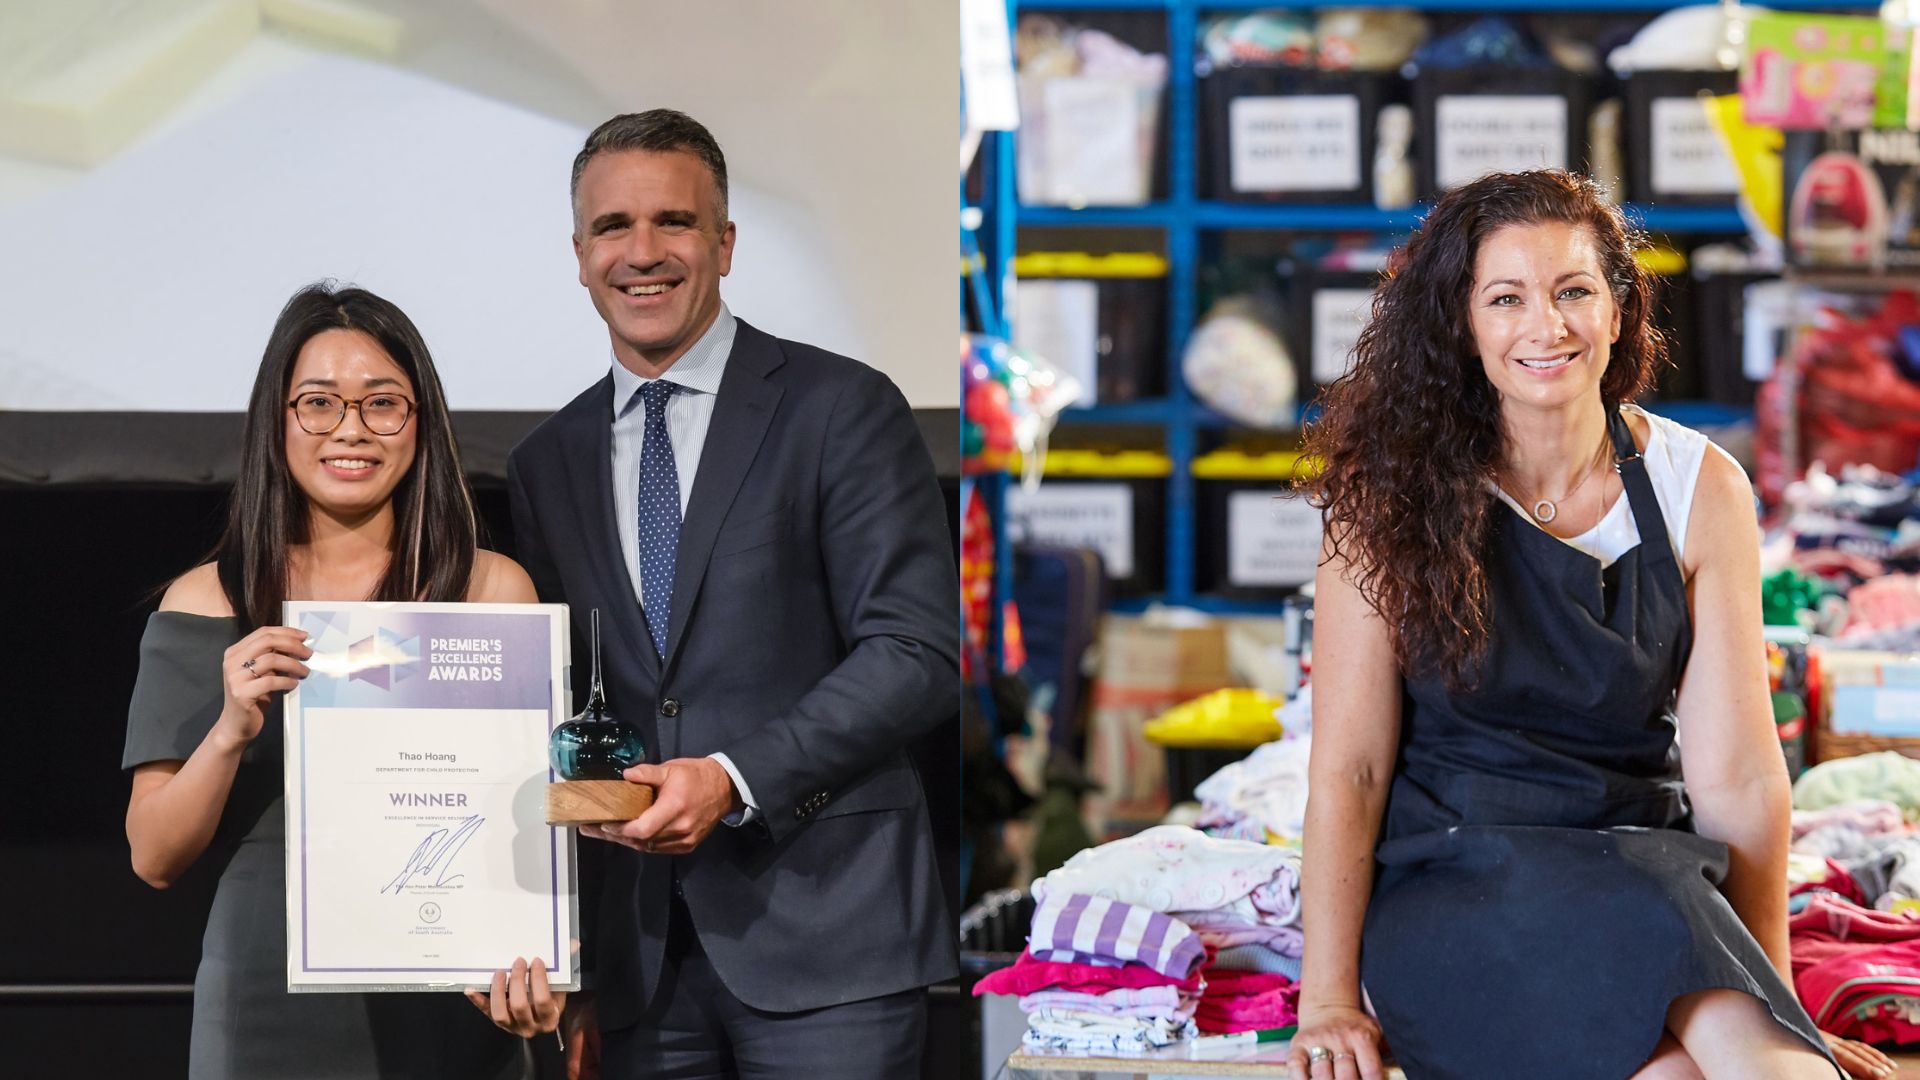 Thao Hoang being presented her Premier's Excellence Award by Peter Malinauskas MP (left) and Rikki Cooke in her Treasure Boxes warehouse (right)